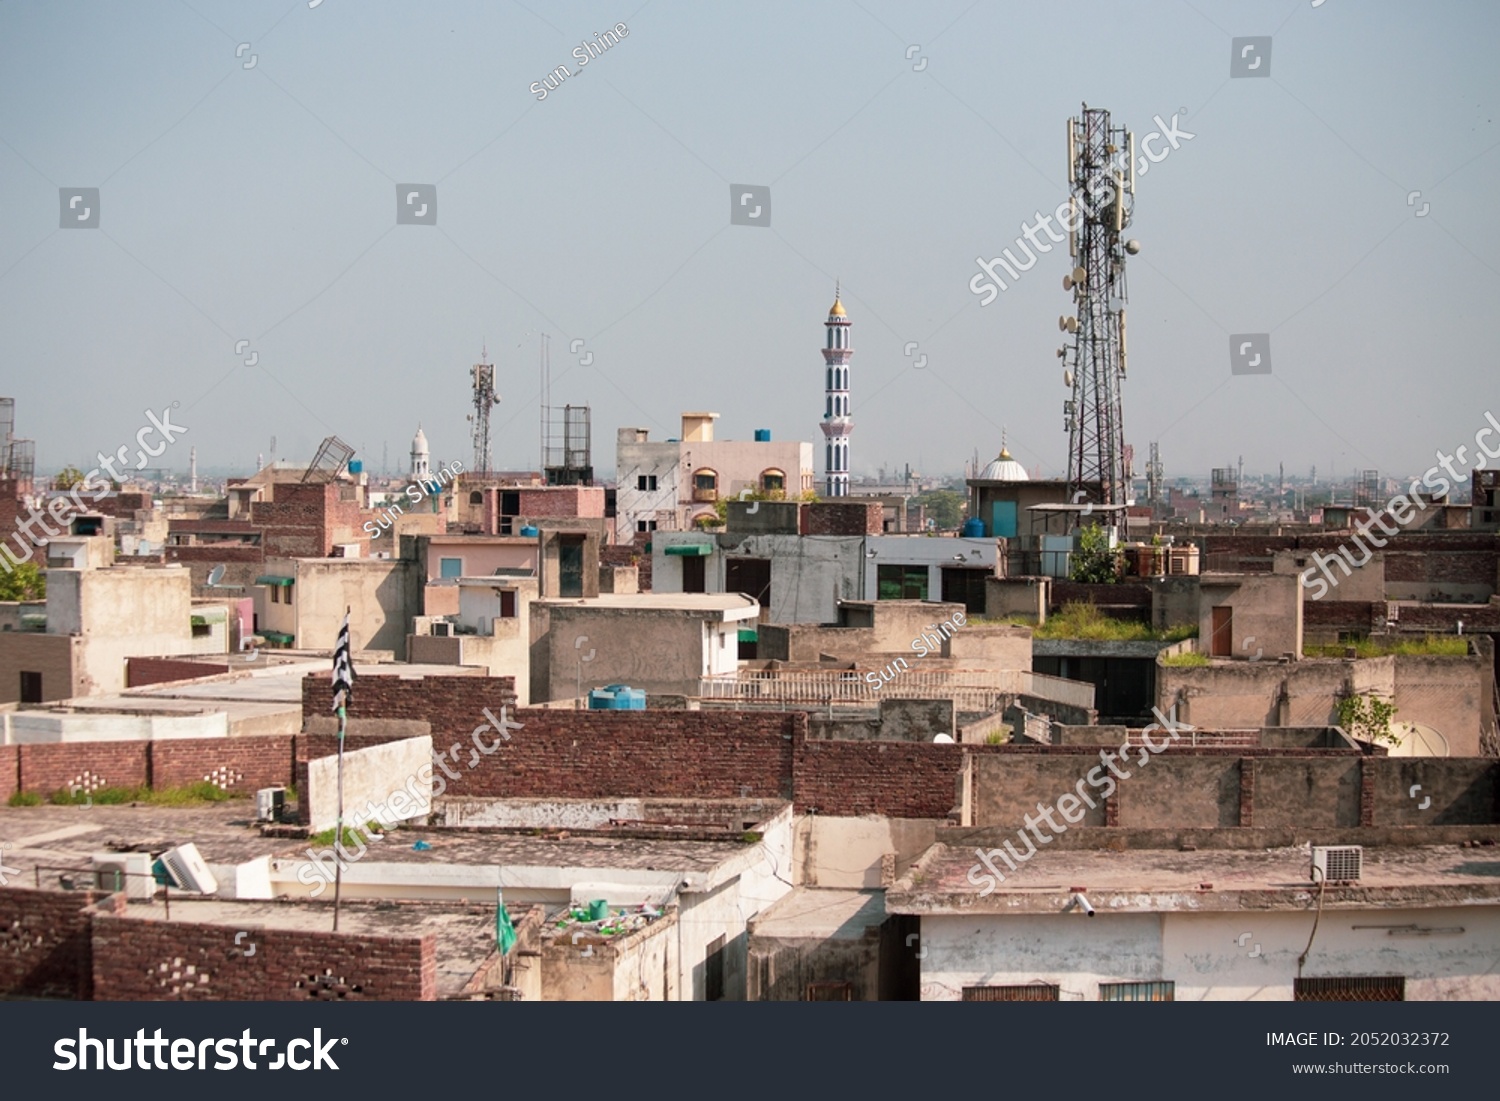 Stock Photo Lahore Pakistan September Aerial View Of Lahore Old Walled City From Wazir Khan Mosque 2052032372 